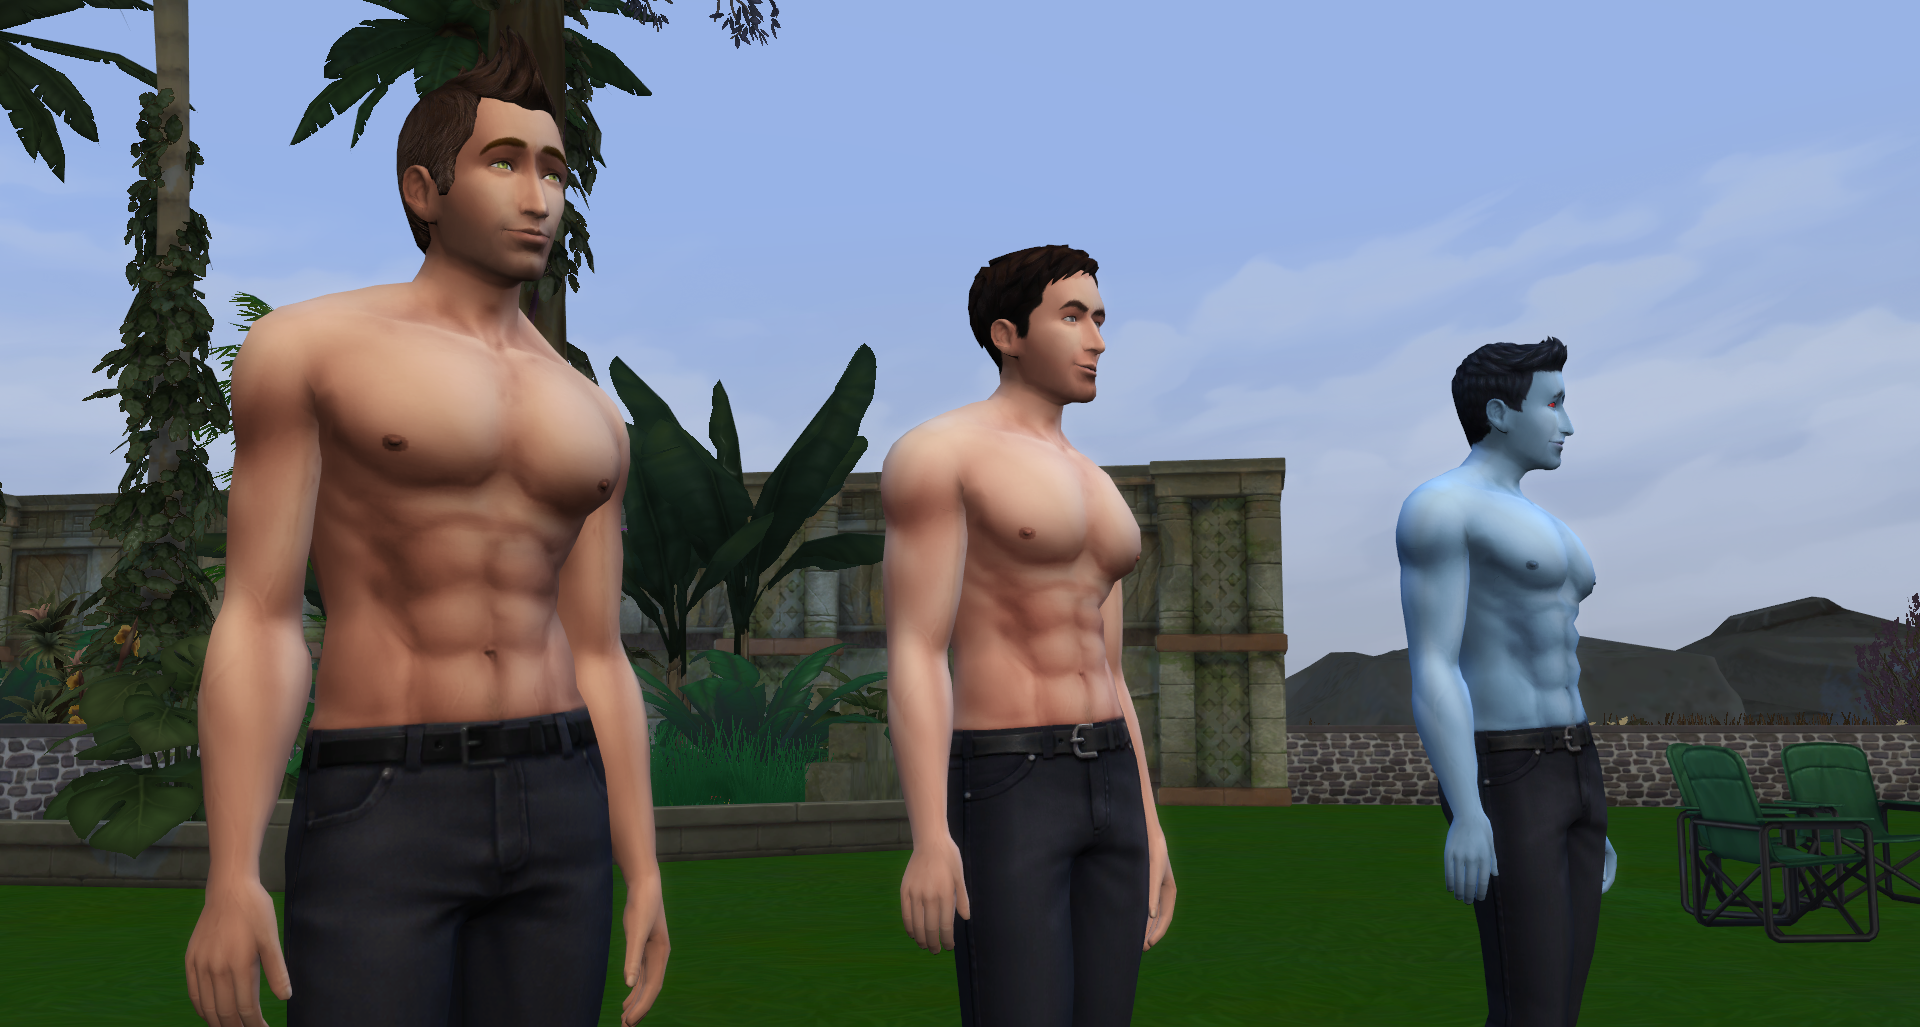 derek boyes reccomend the sims 4 muscle mod pic